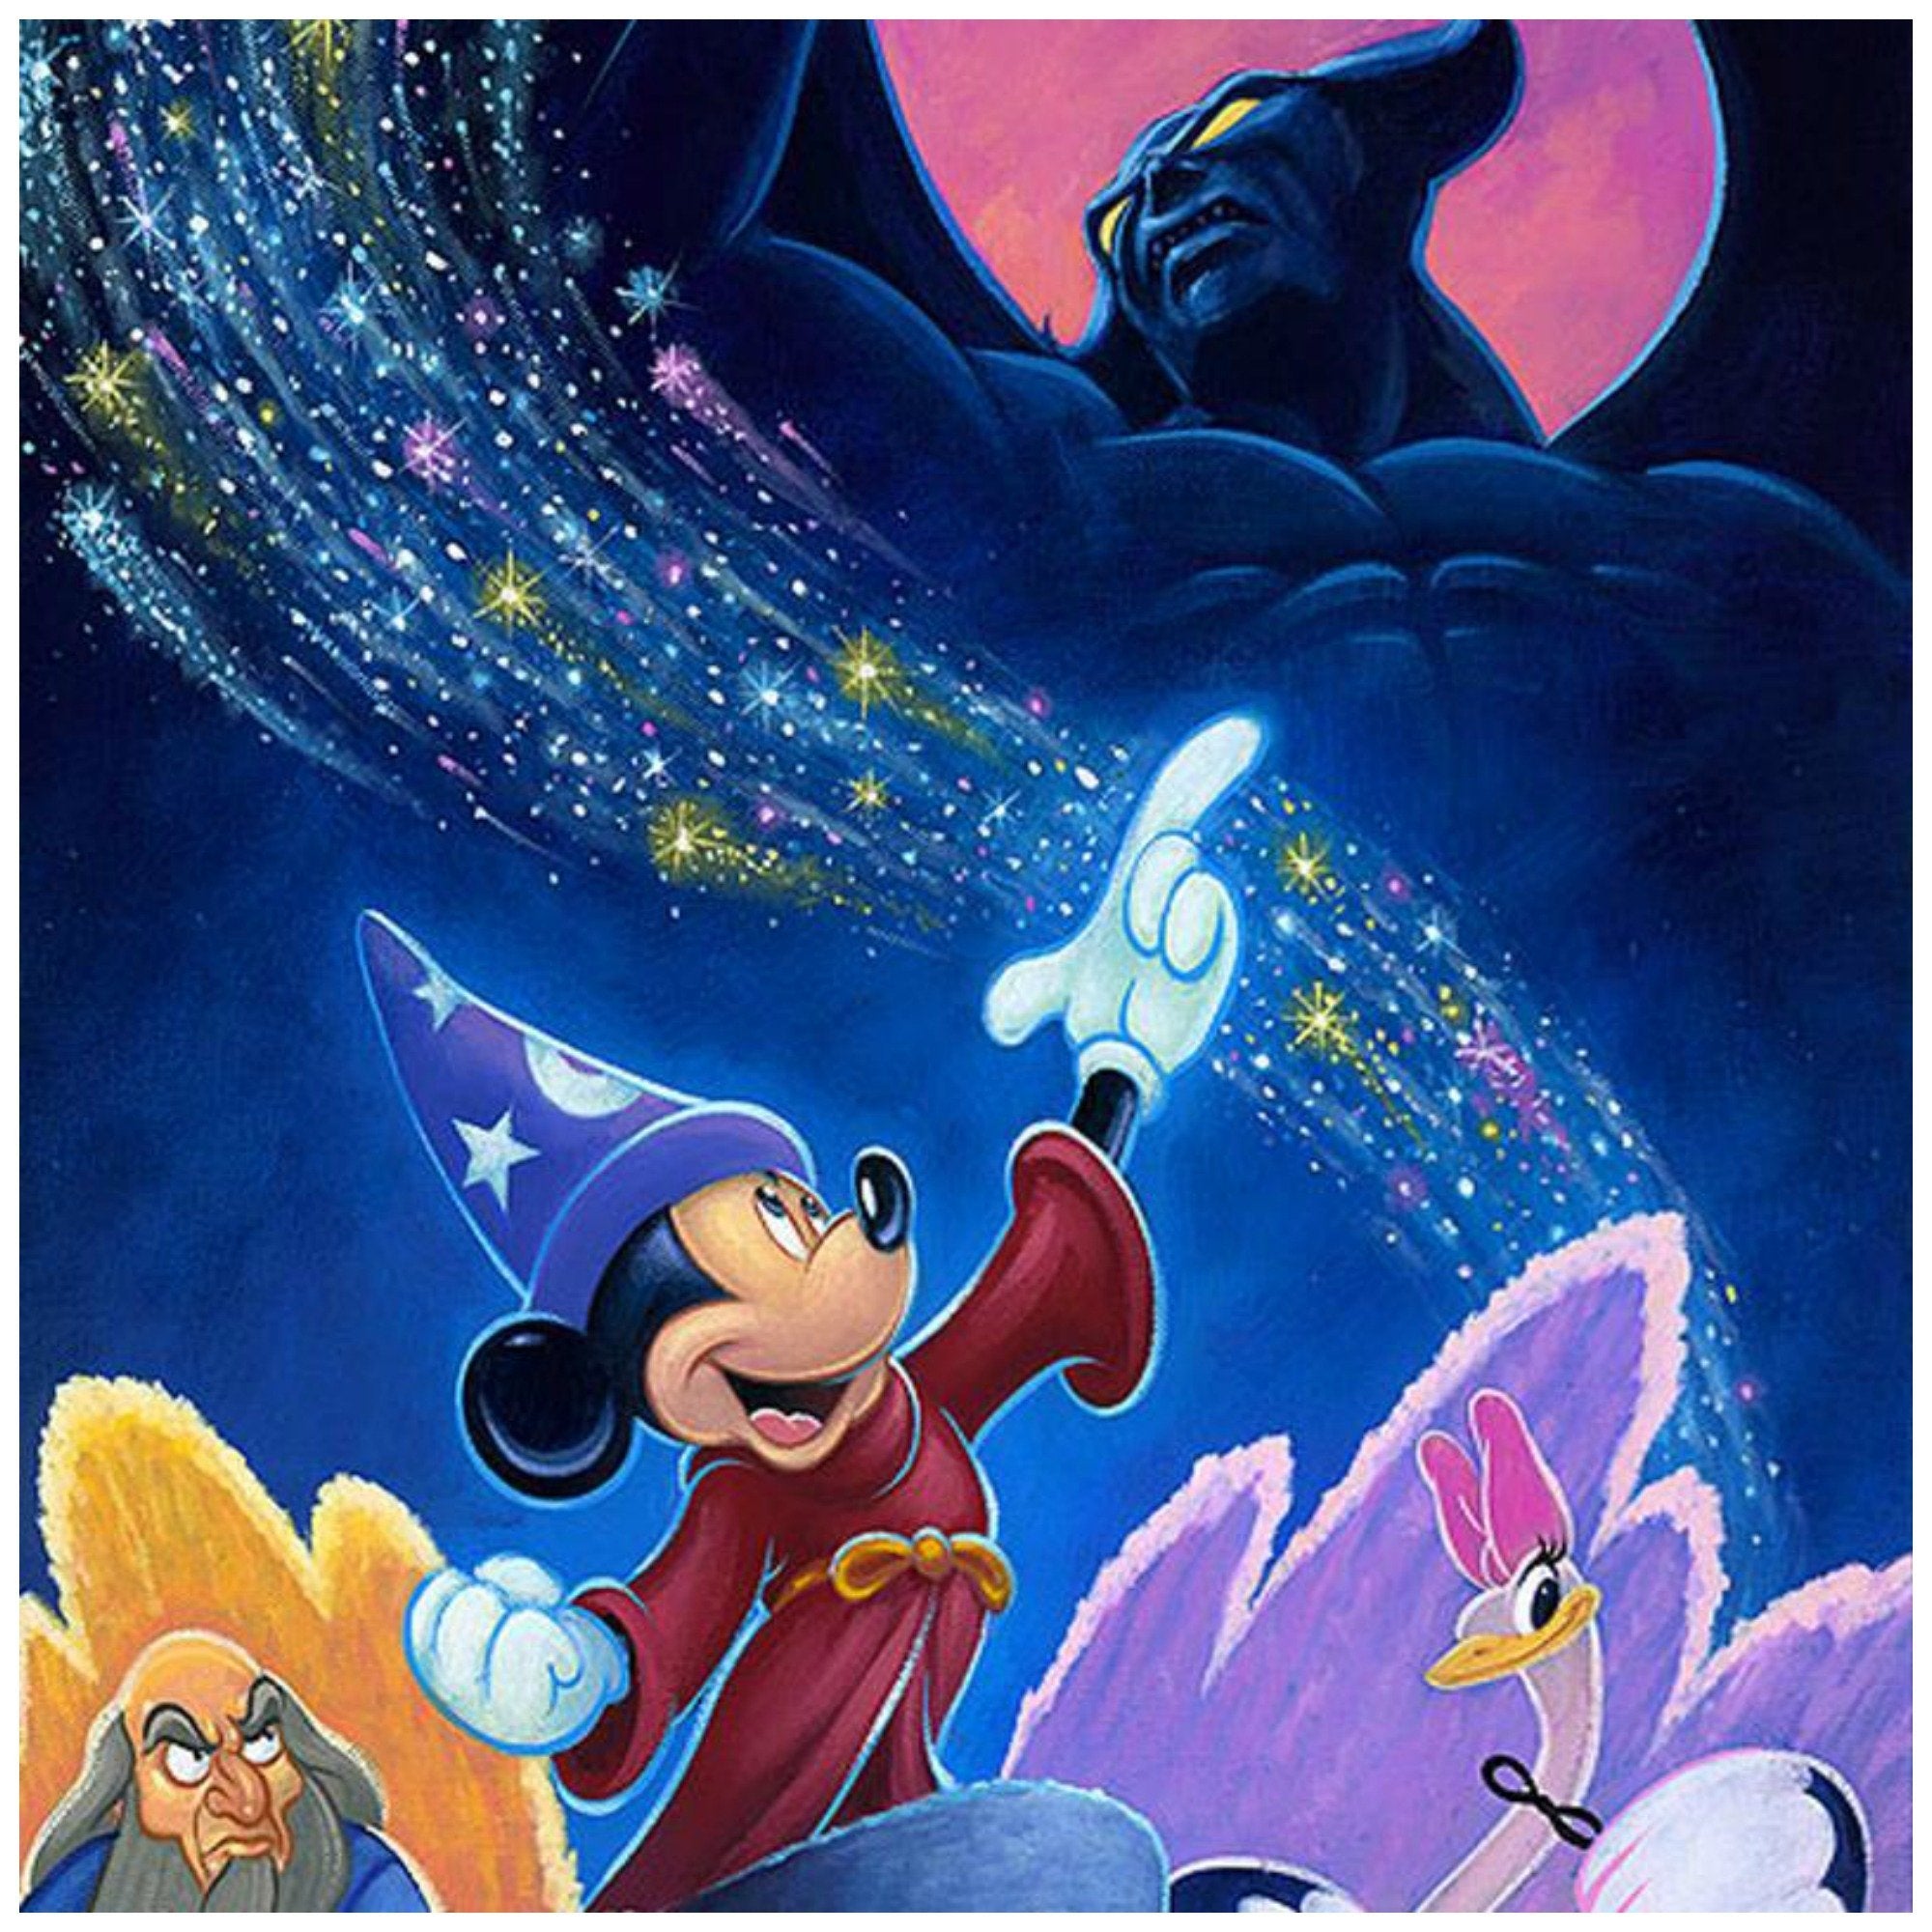 Splashes of Fantasia by Tim Rogerson   Mickey the Sorcerer whips up and awaken Chernobog the "black god" and as the magical creatures including an unhappy Yen Sid the powerful sorcerer watch - closeup